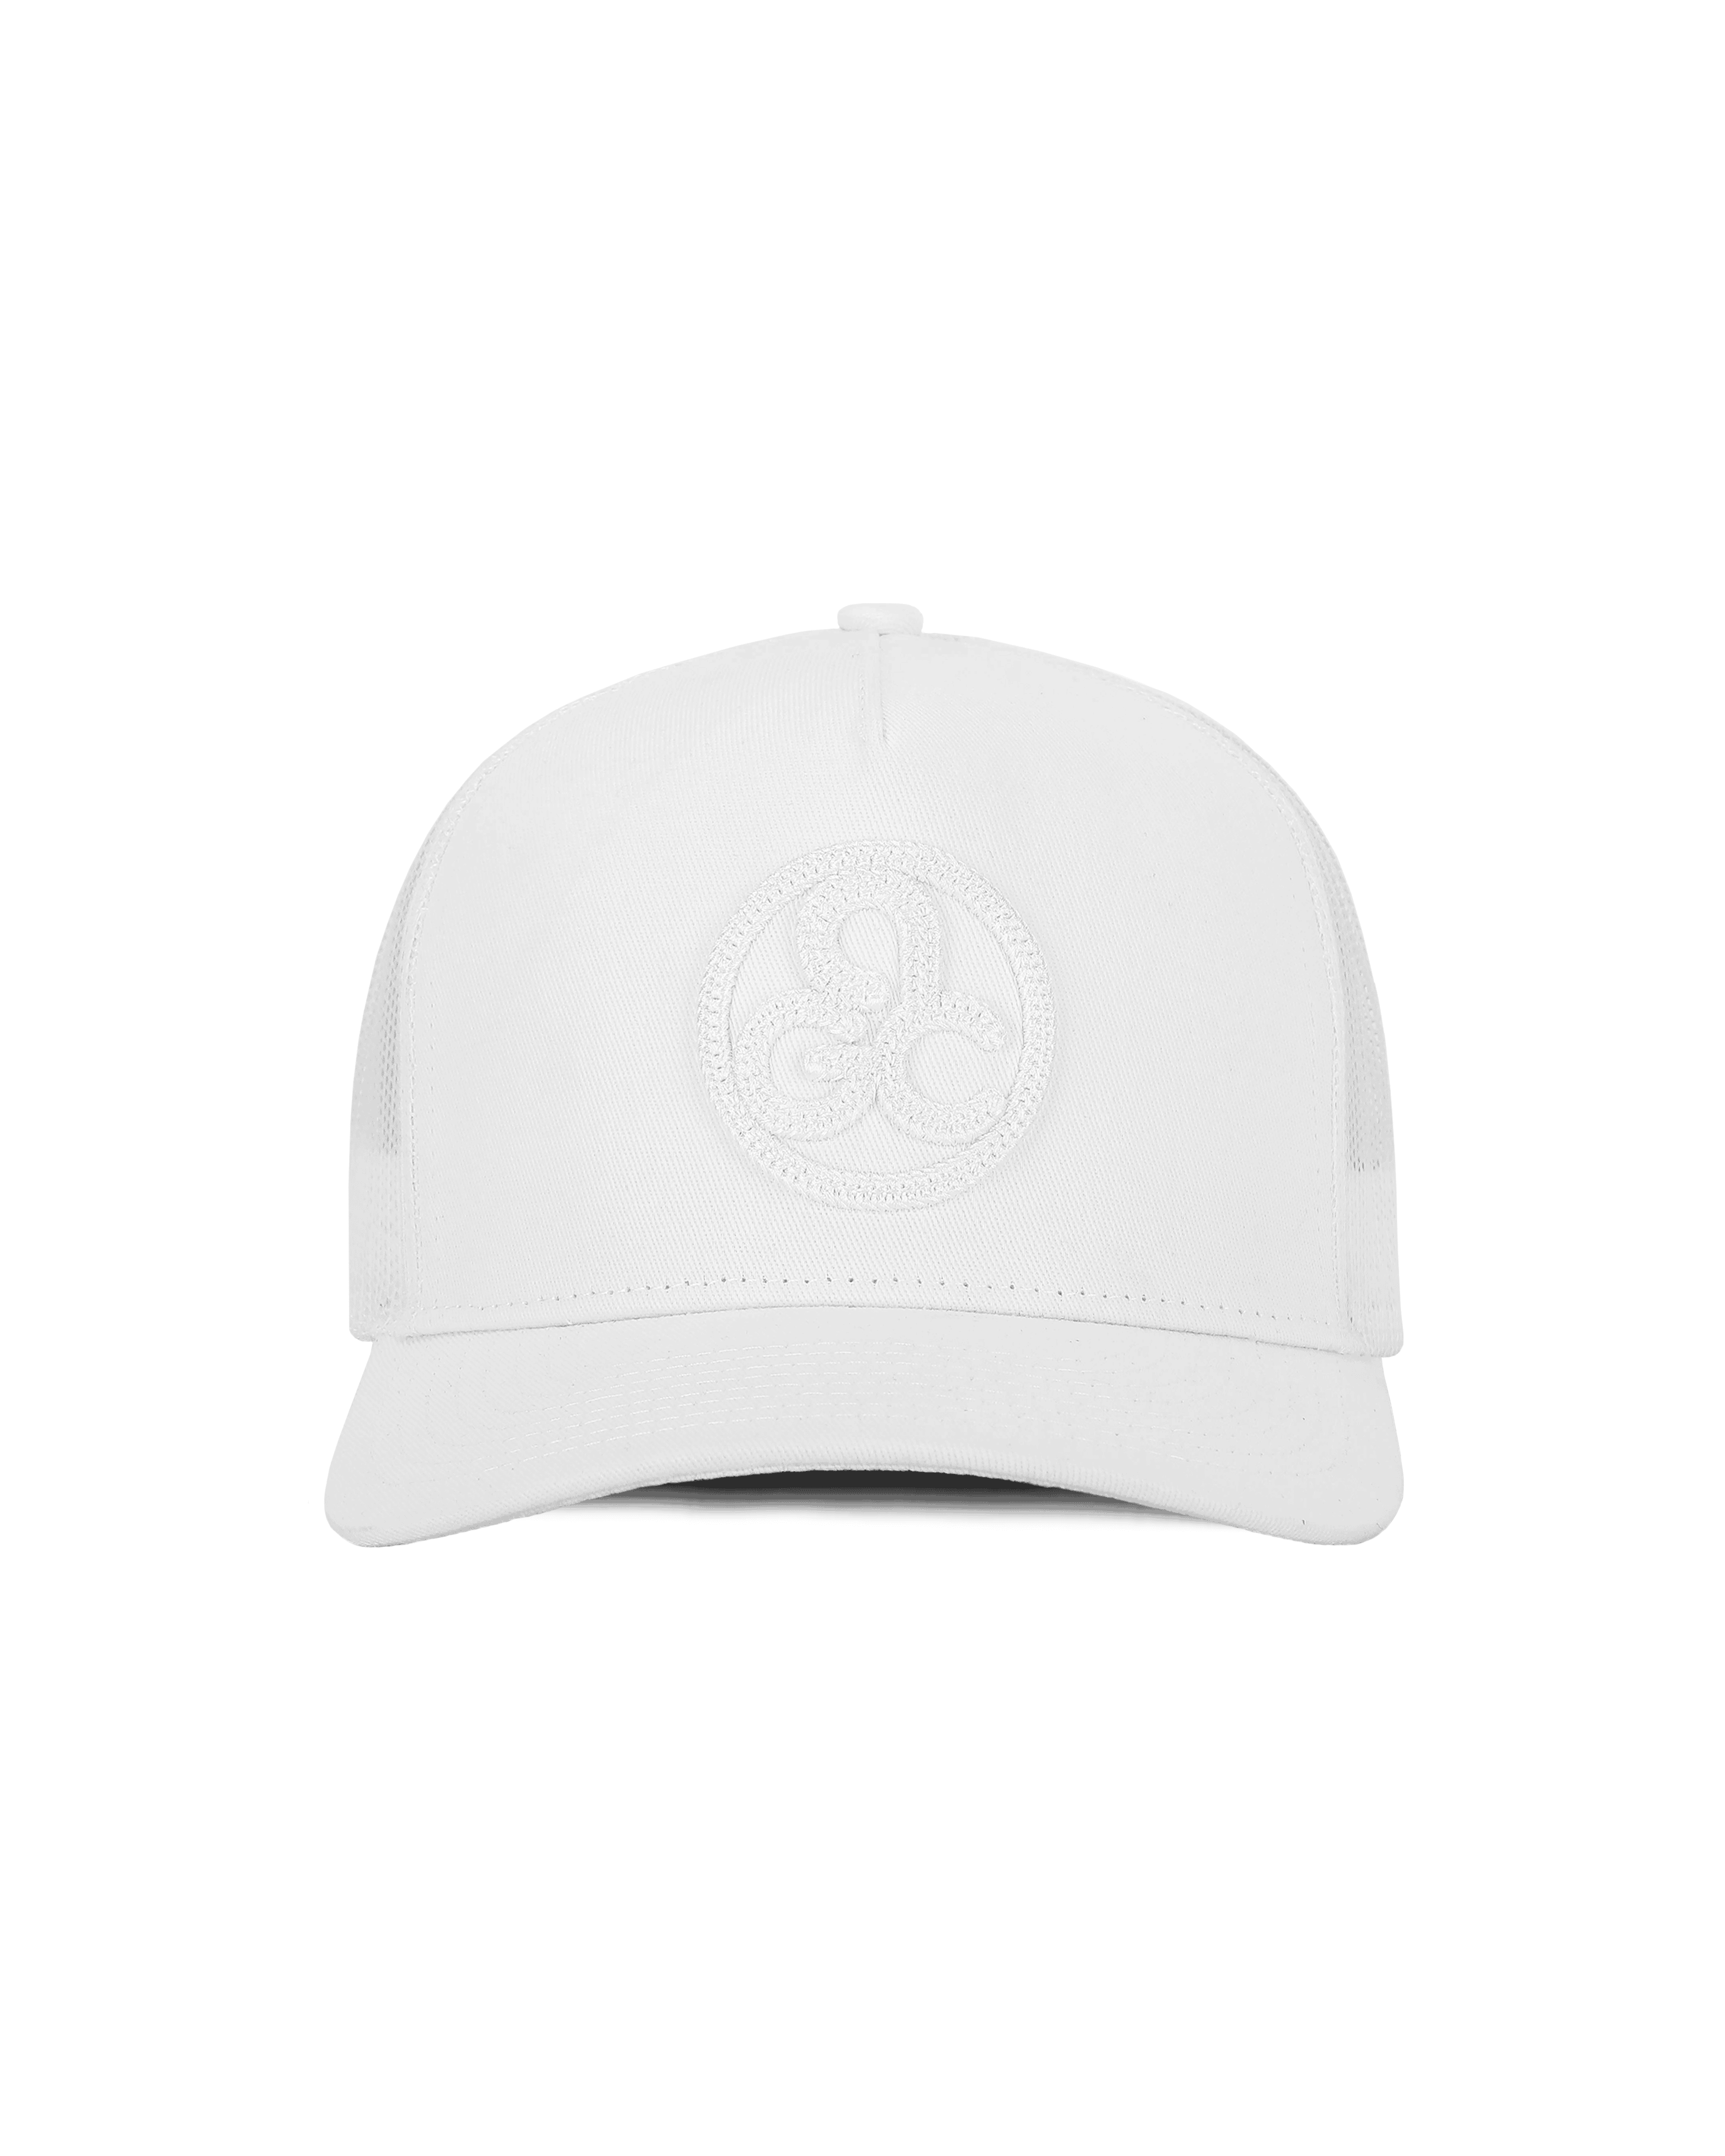 THE PACIFIC TRUCKER HAT - ALL WHITE